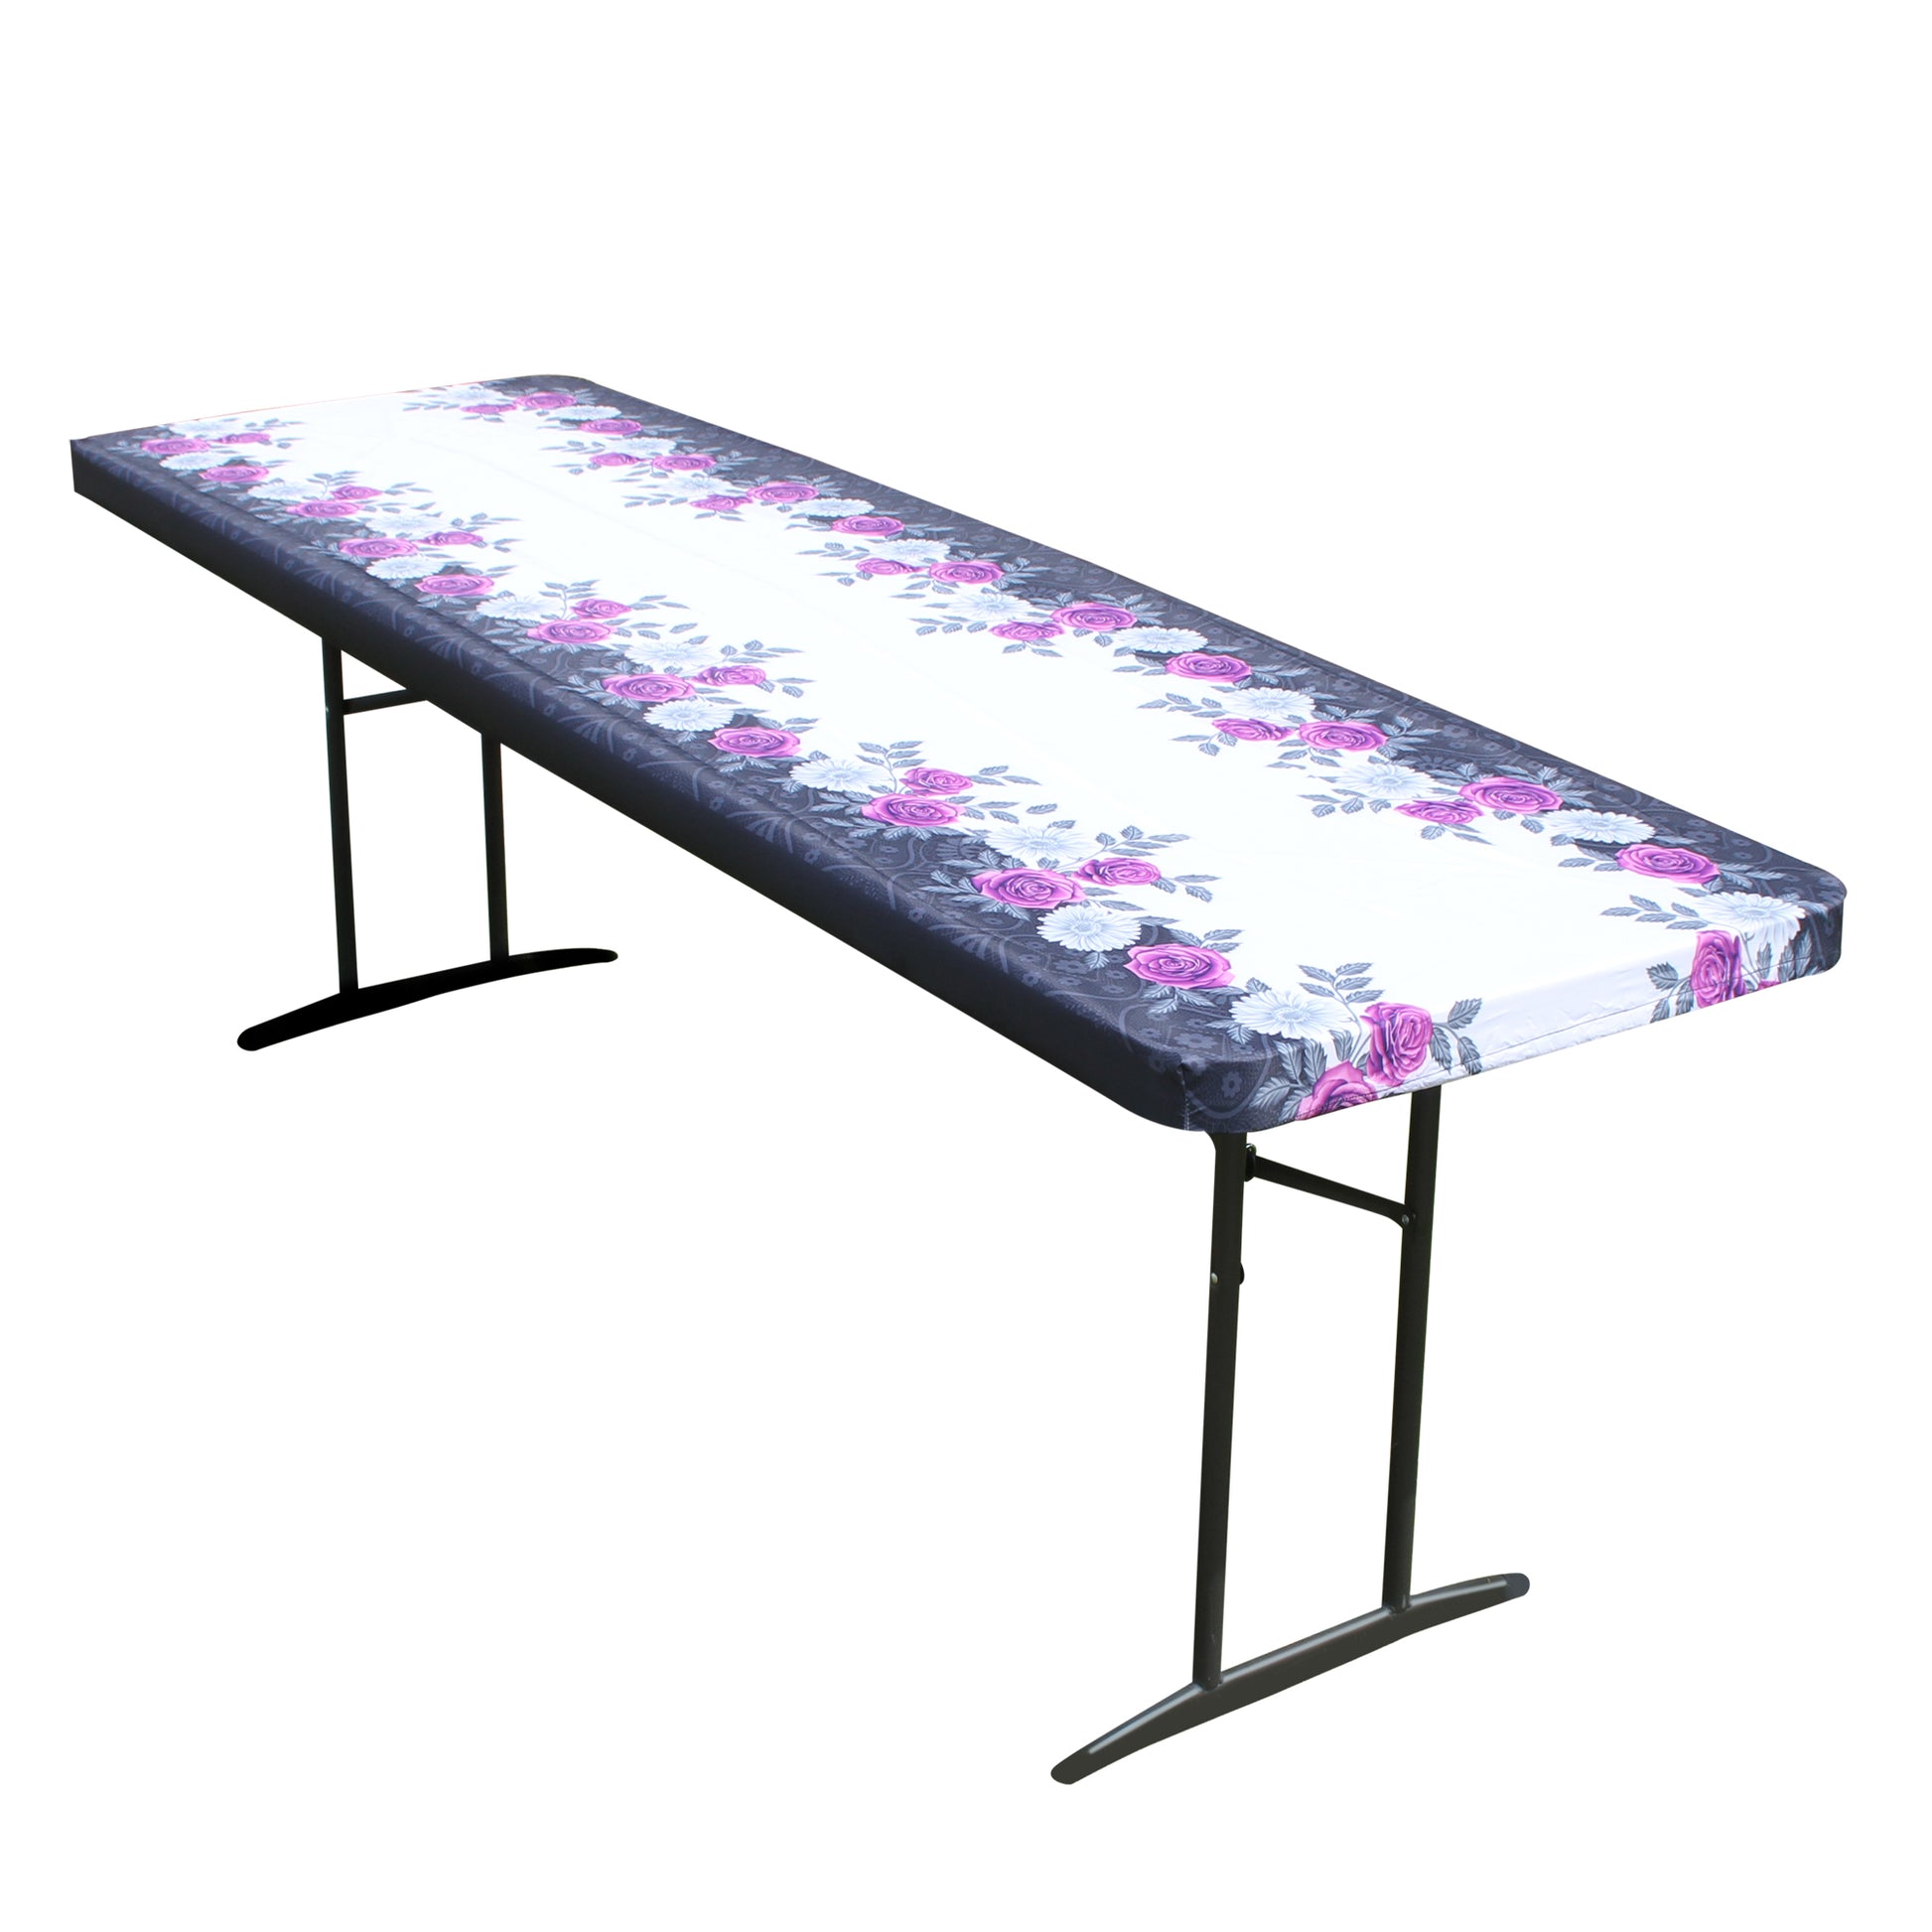 TableCloth PLUS 96" Roses Fitted Polyester Tablecloth for 8' Folding Tables is easy to clean, water proof, easy to install, and has an elastic rim